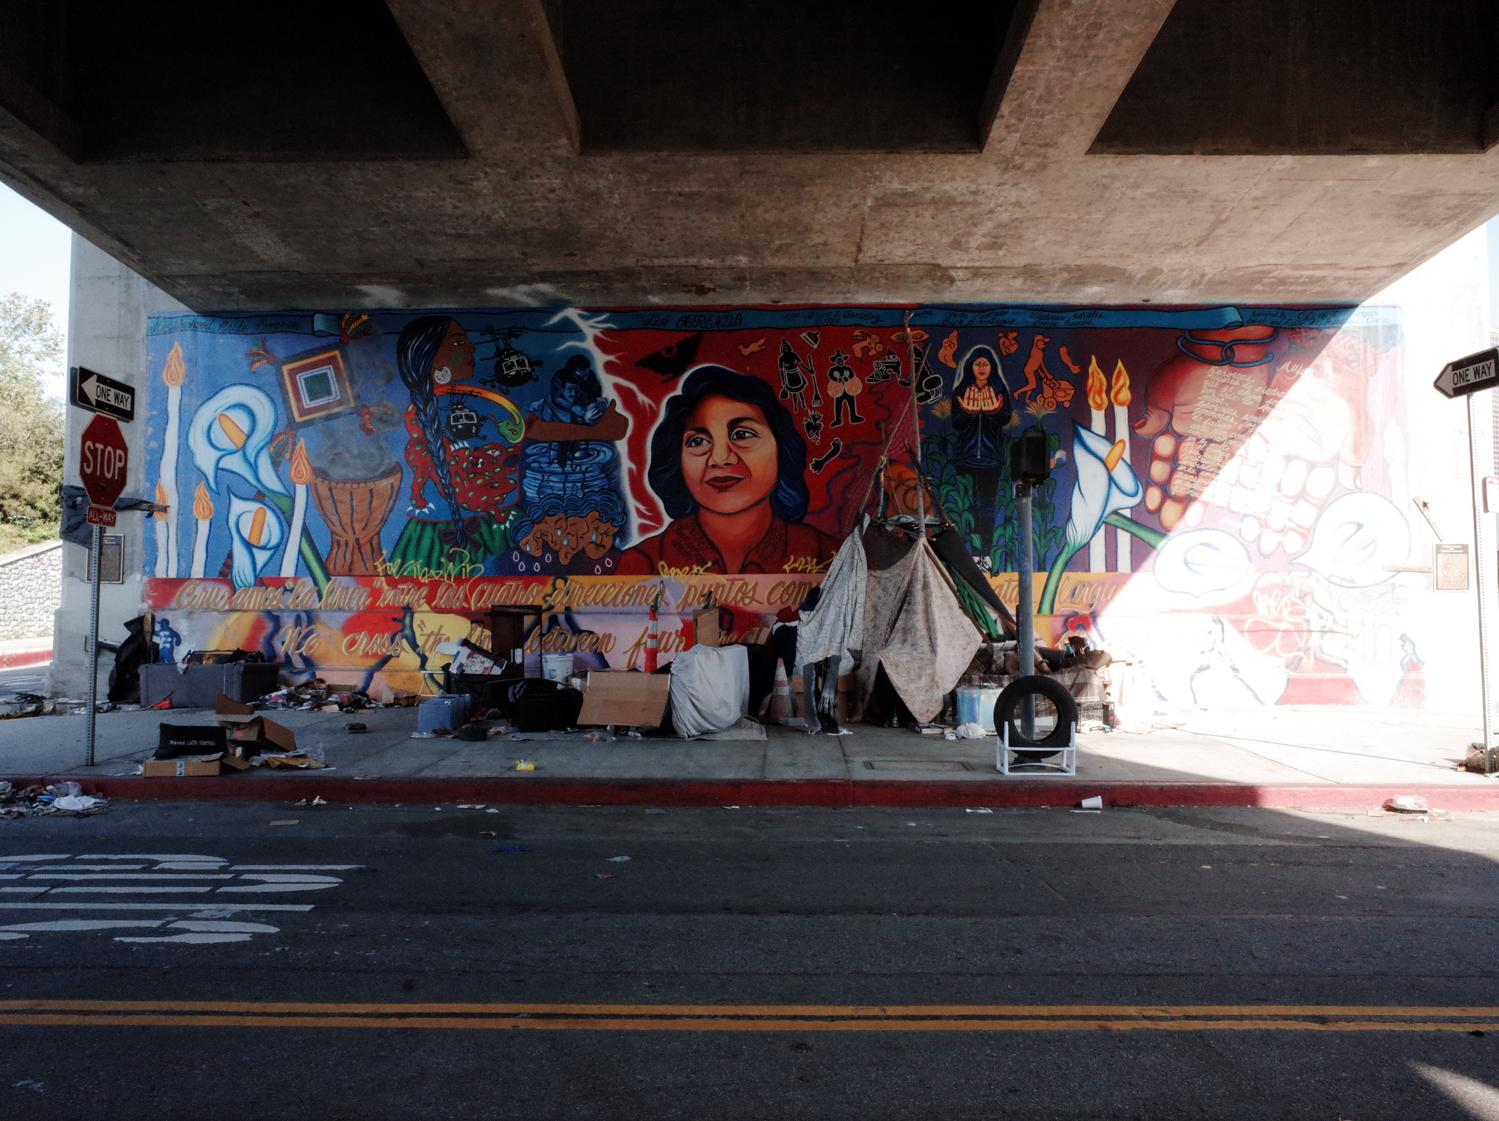 Big mural and a teepee house